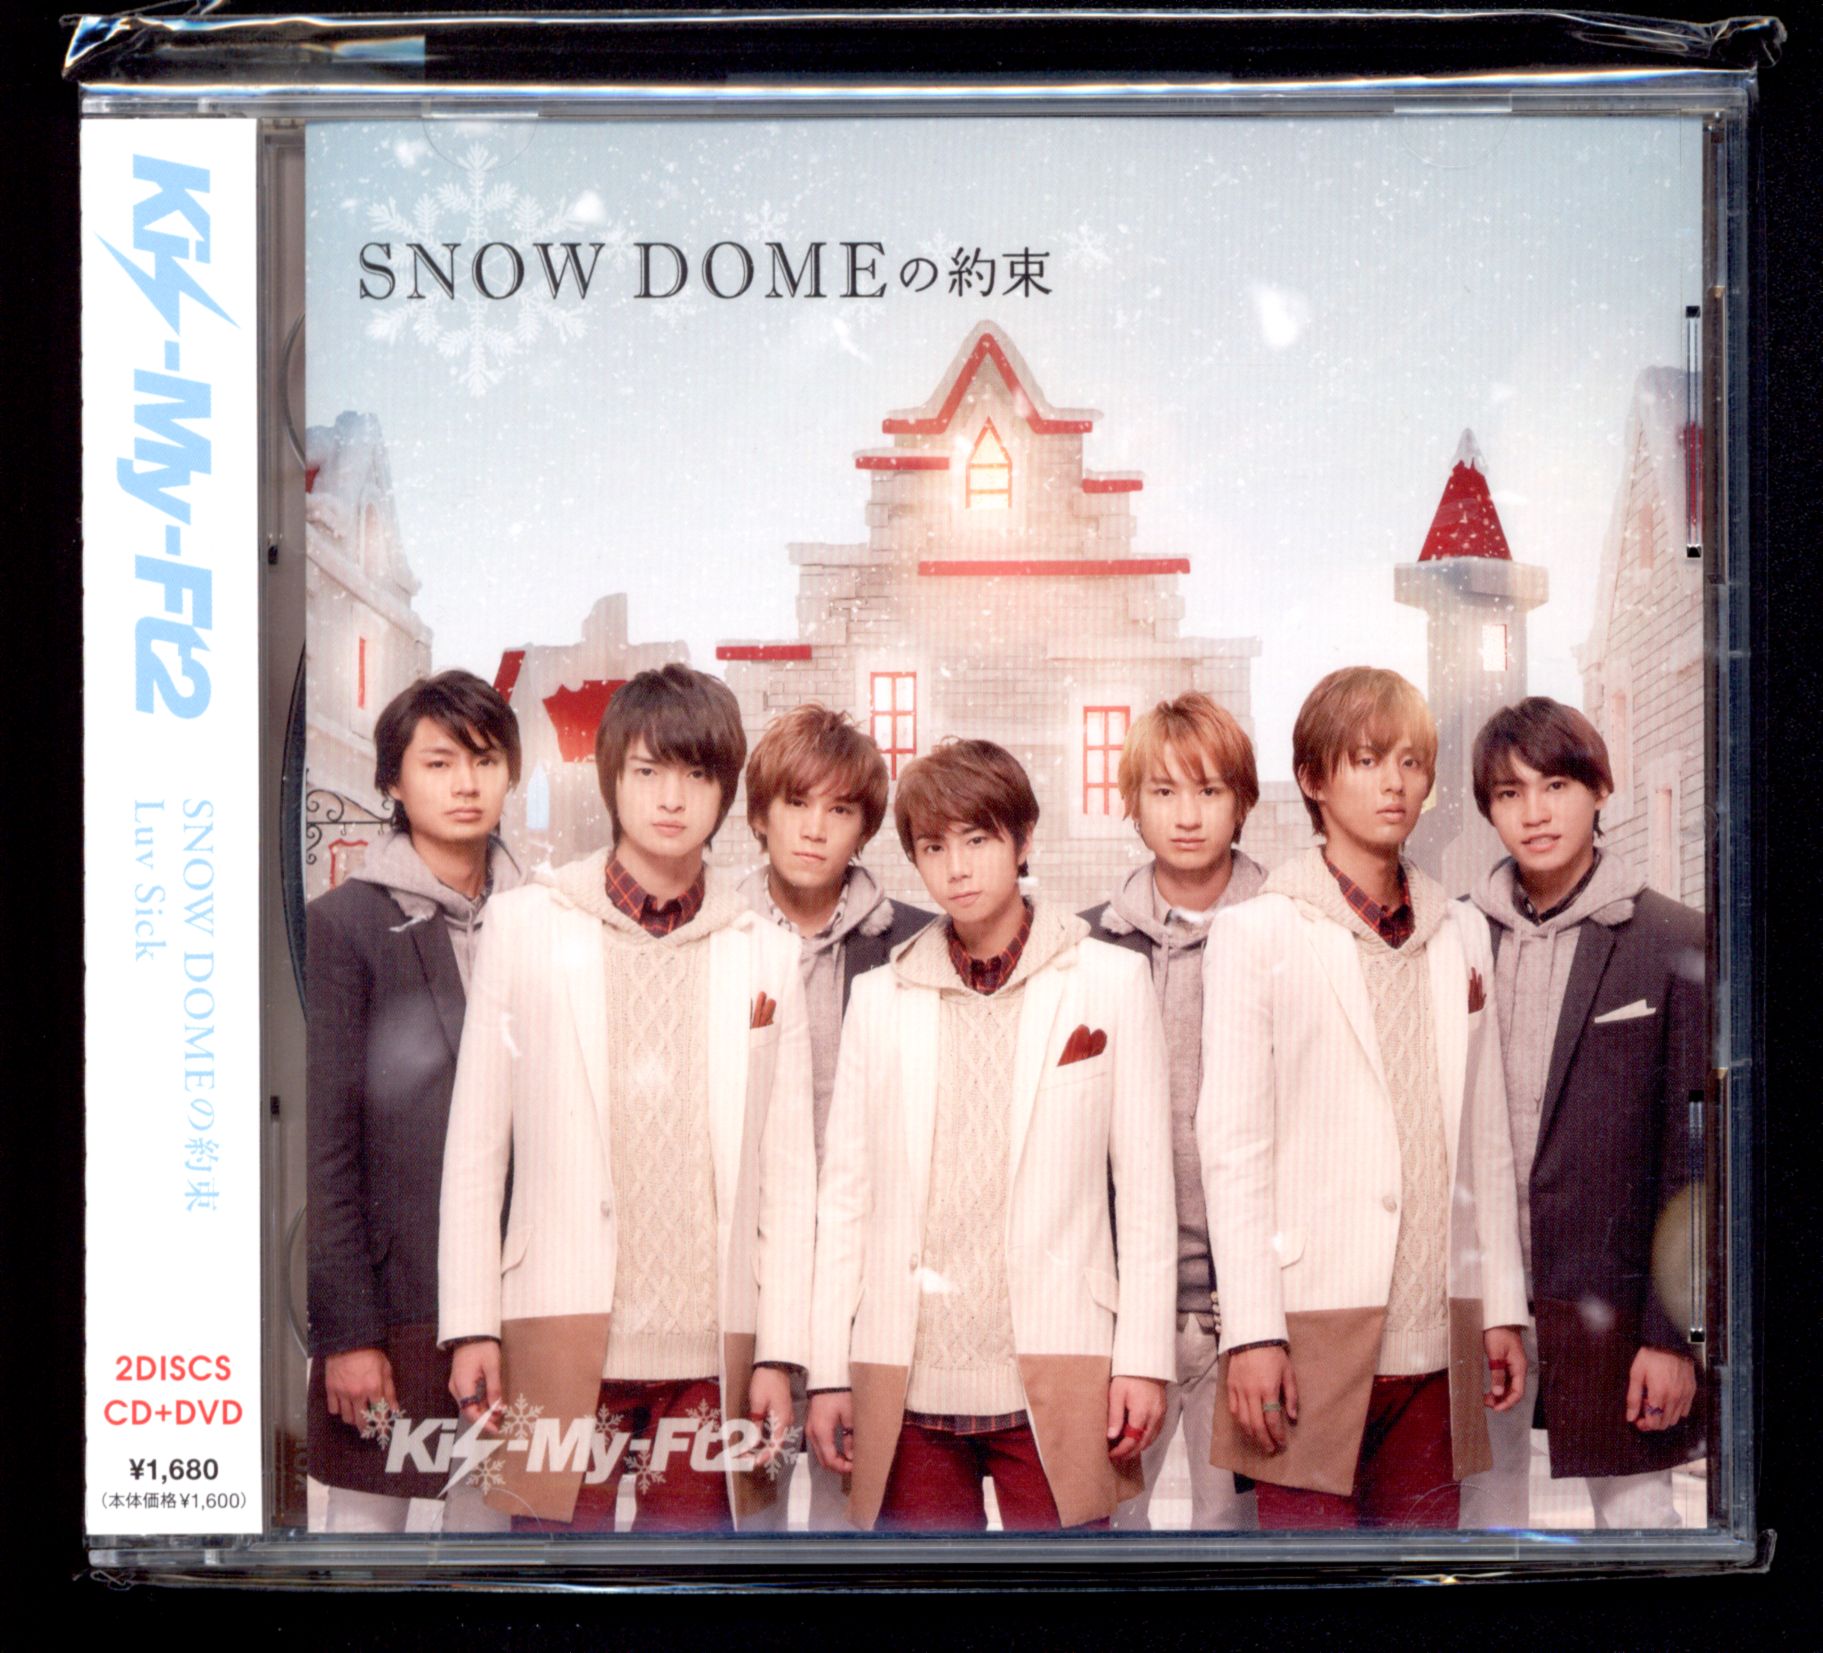 Kis-my-ft2 SNOW DOMEの約束〈通常盤〉 - 邦楽